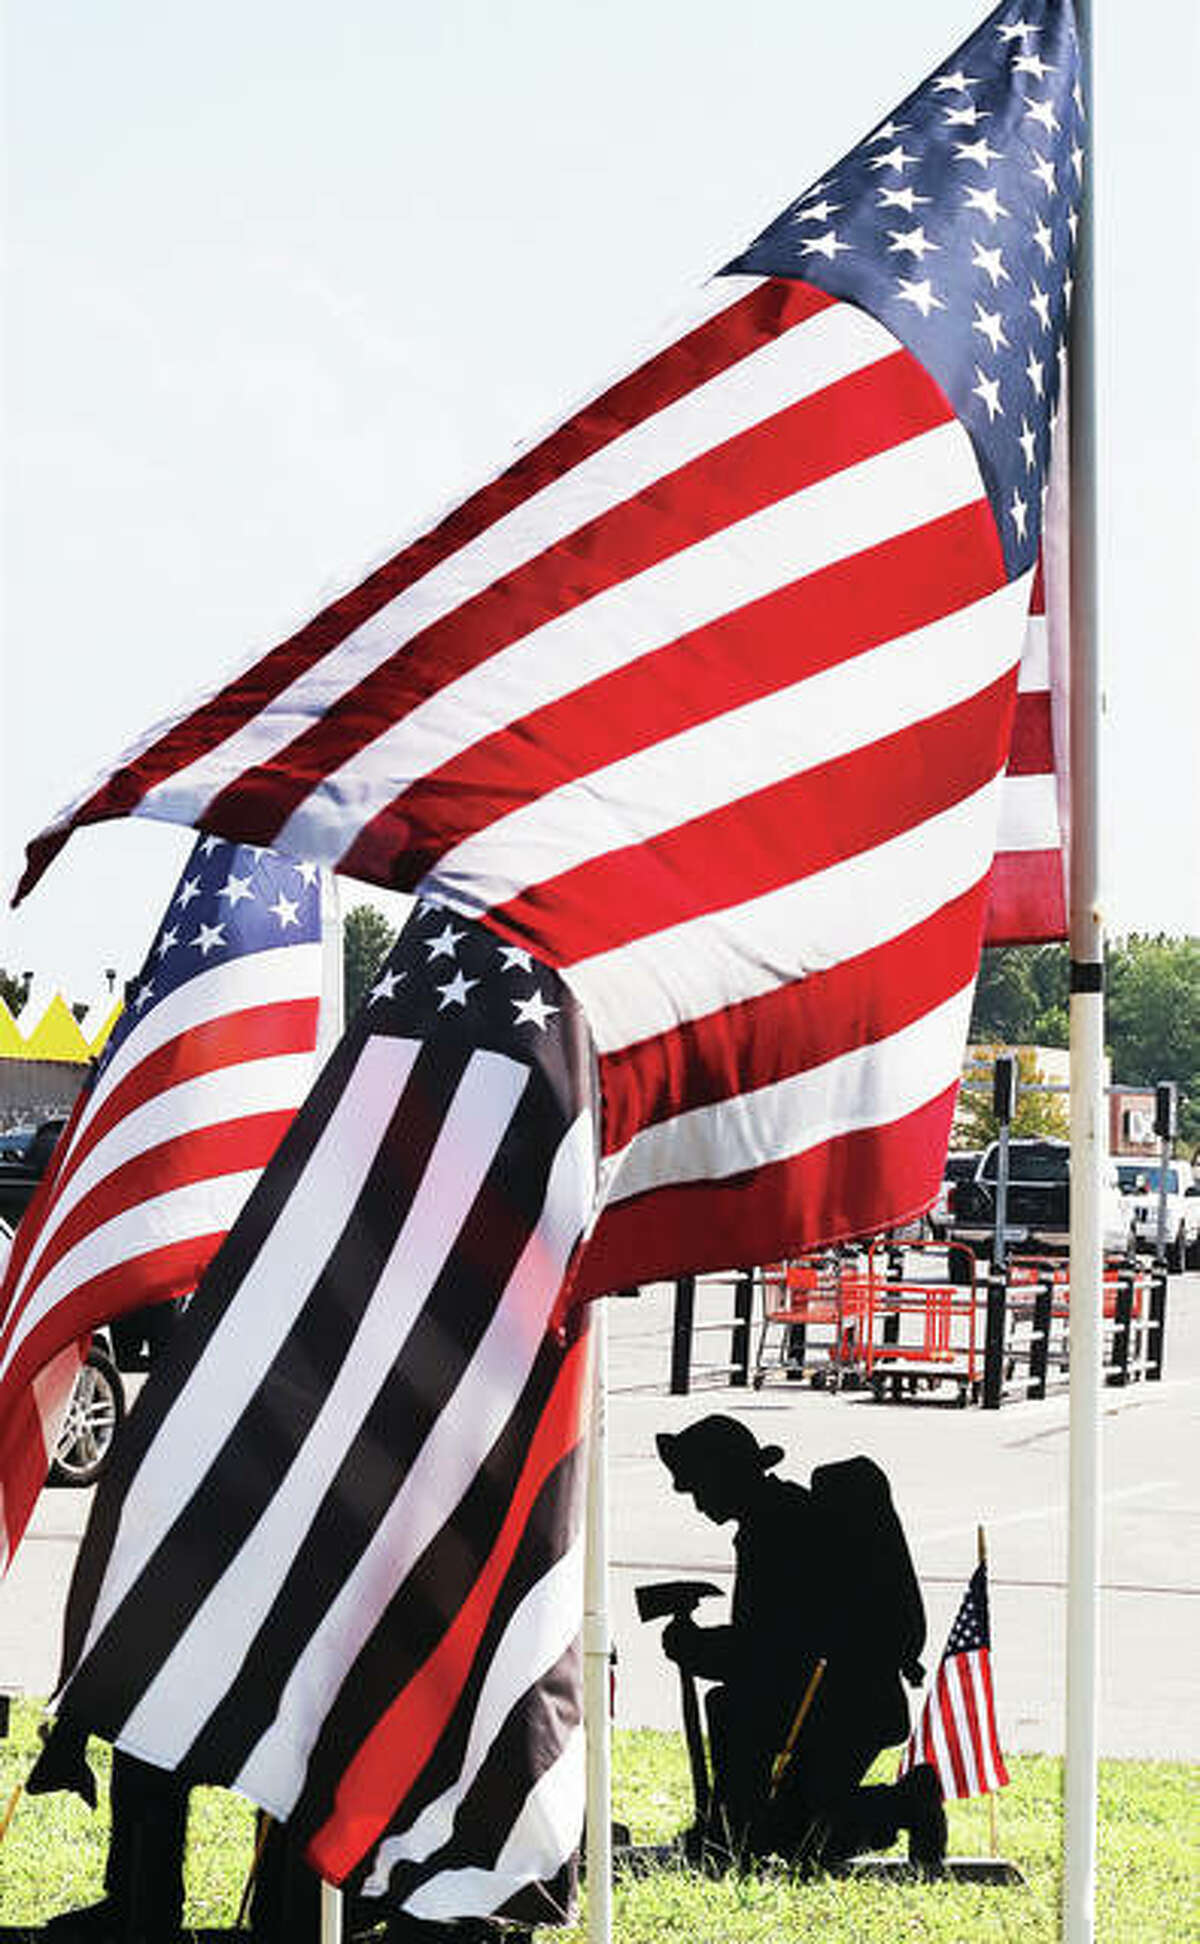 A display of flags and silhouettes is setup at the edge of the parking lot at the Alton Home Depot to honor those who died in the terrorist attacks on the United States 19 years ago Friday. Of the 2,977 people who died in the three attacks, 343 were firefighters.